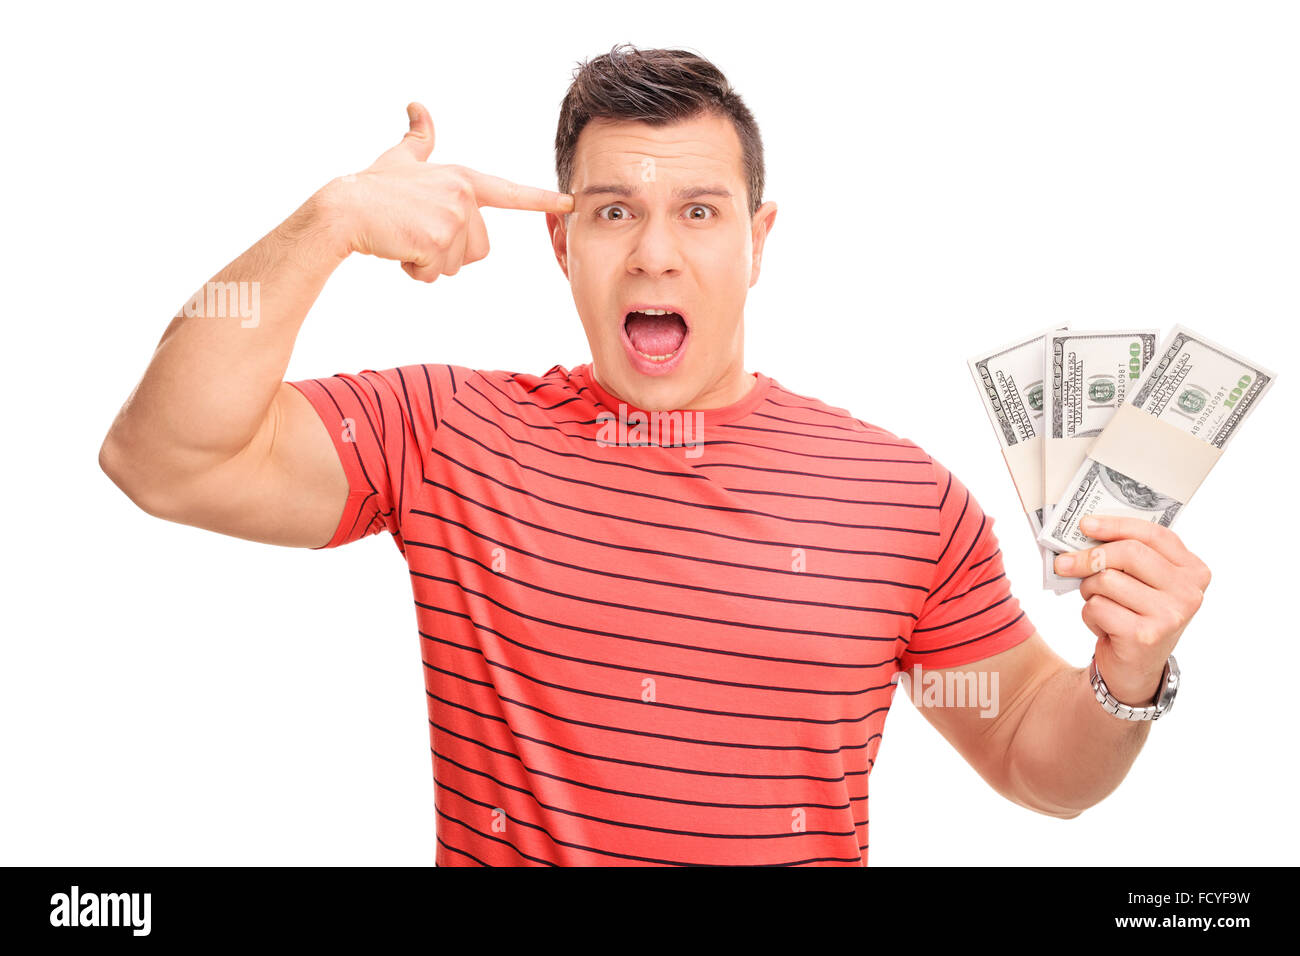 Young man holding money and his hand against his head making a gun gesture isolated on white background Stock Photo